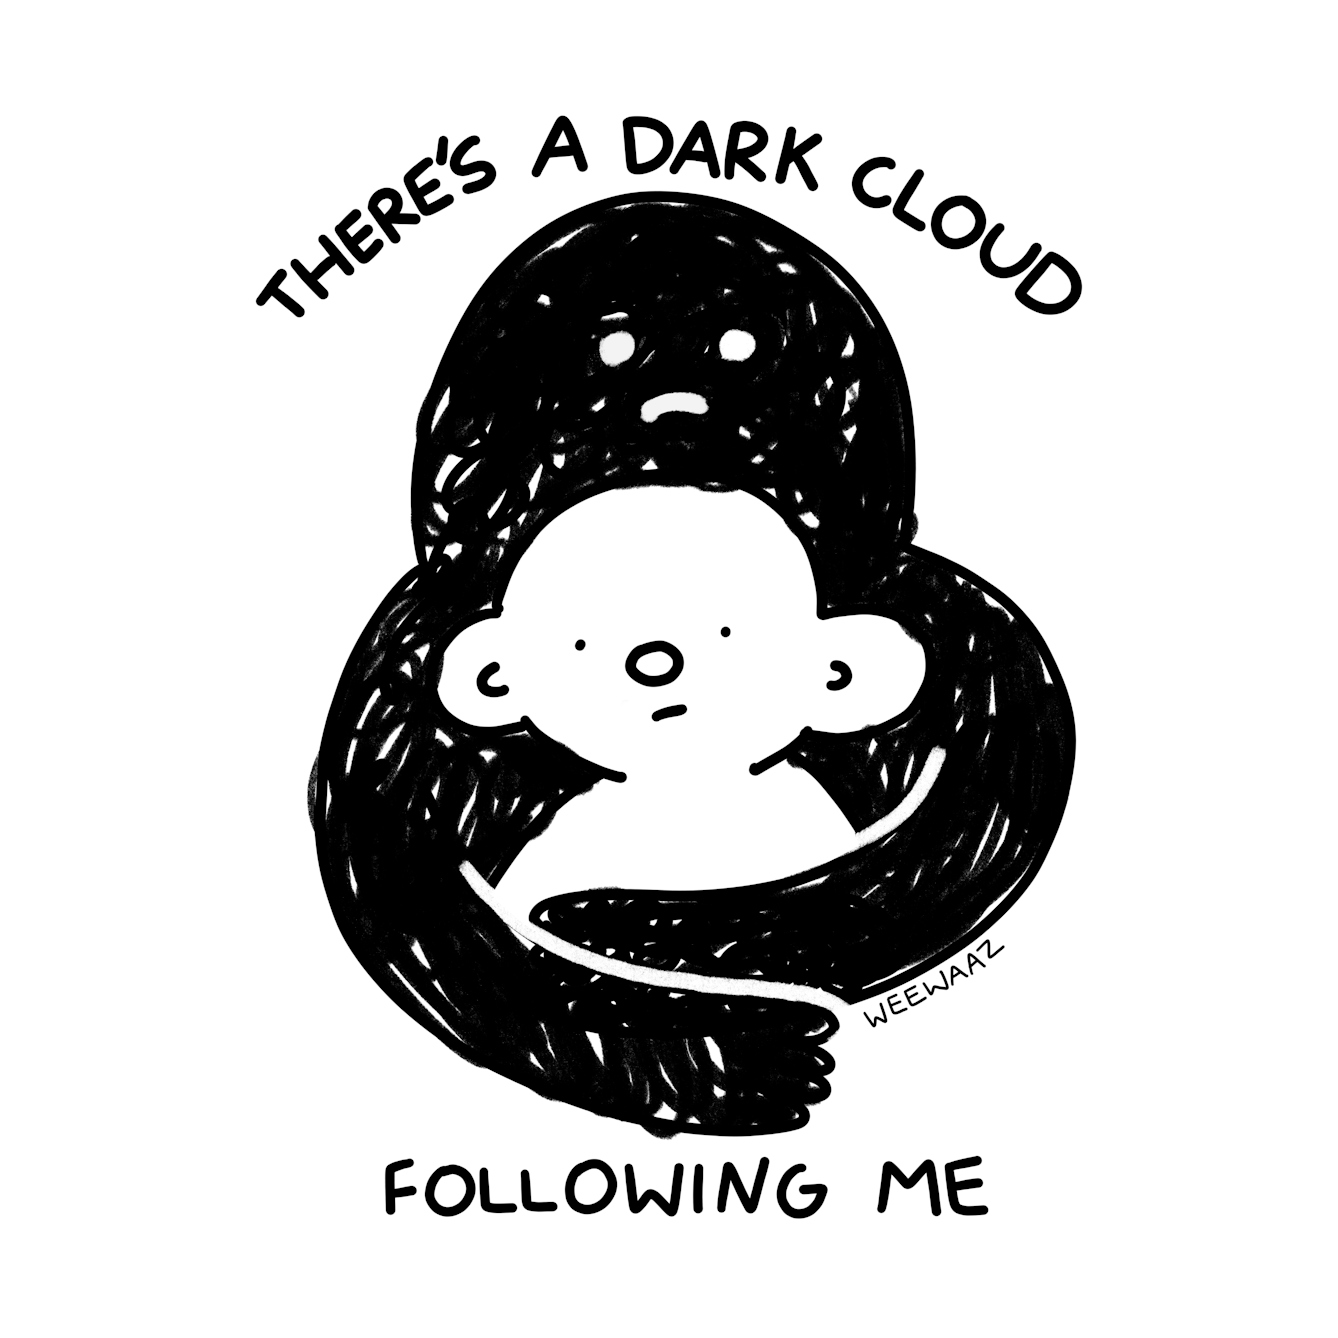 A cartoon figure has a dark cloud wrapped around them. Both have a solemn look on their face.The accompanying text reads ‘There’s a dark cloud following me’. 